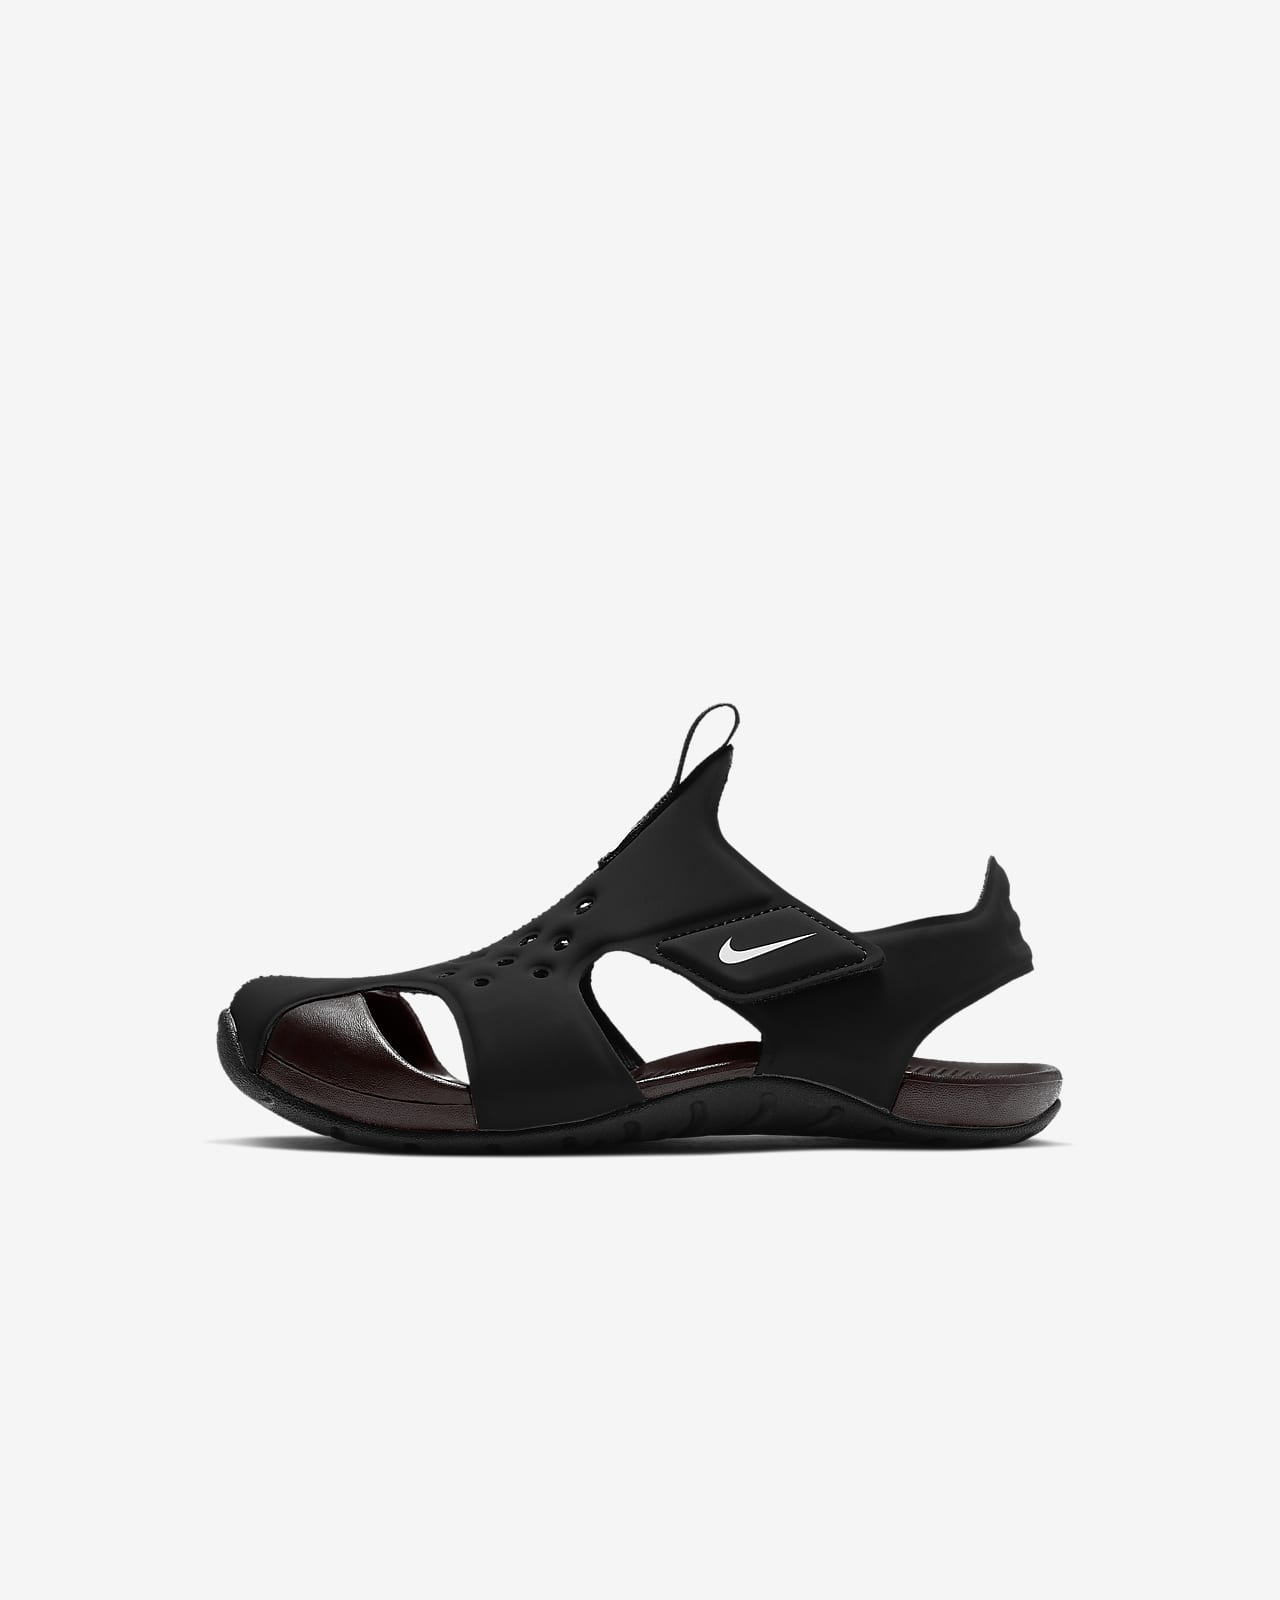 nike youth sandals